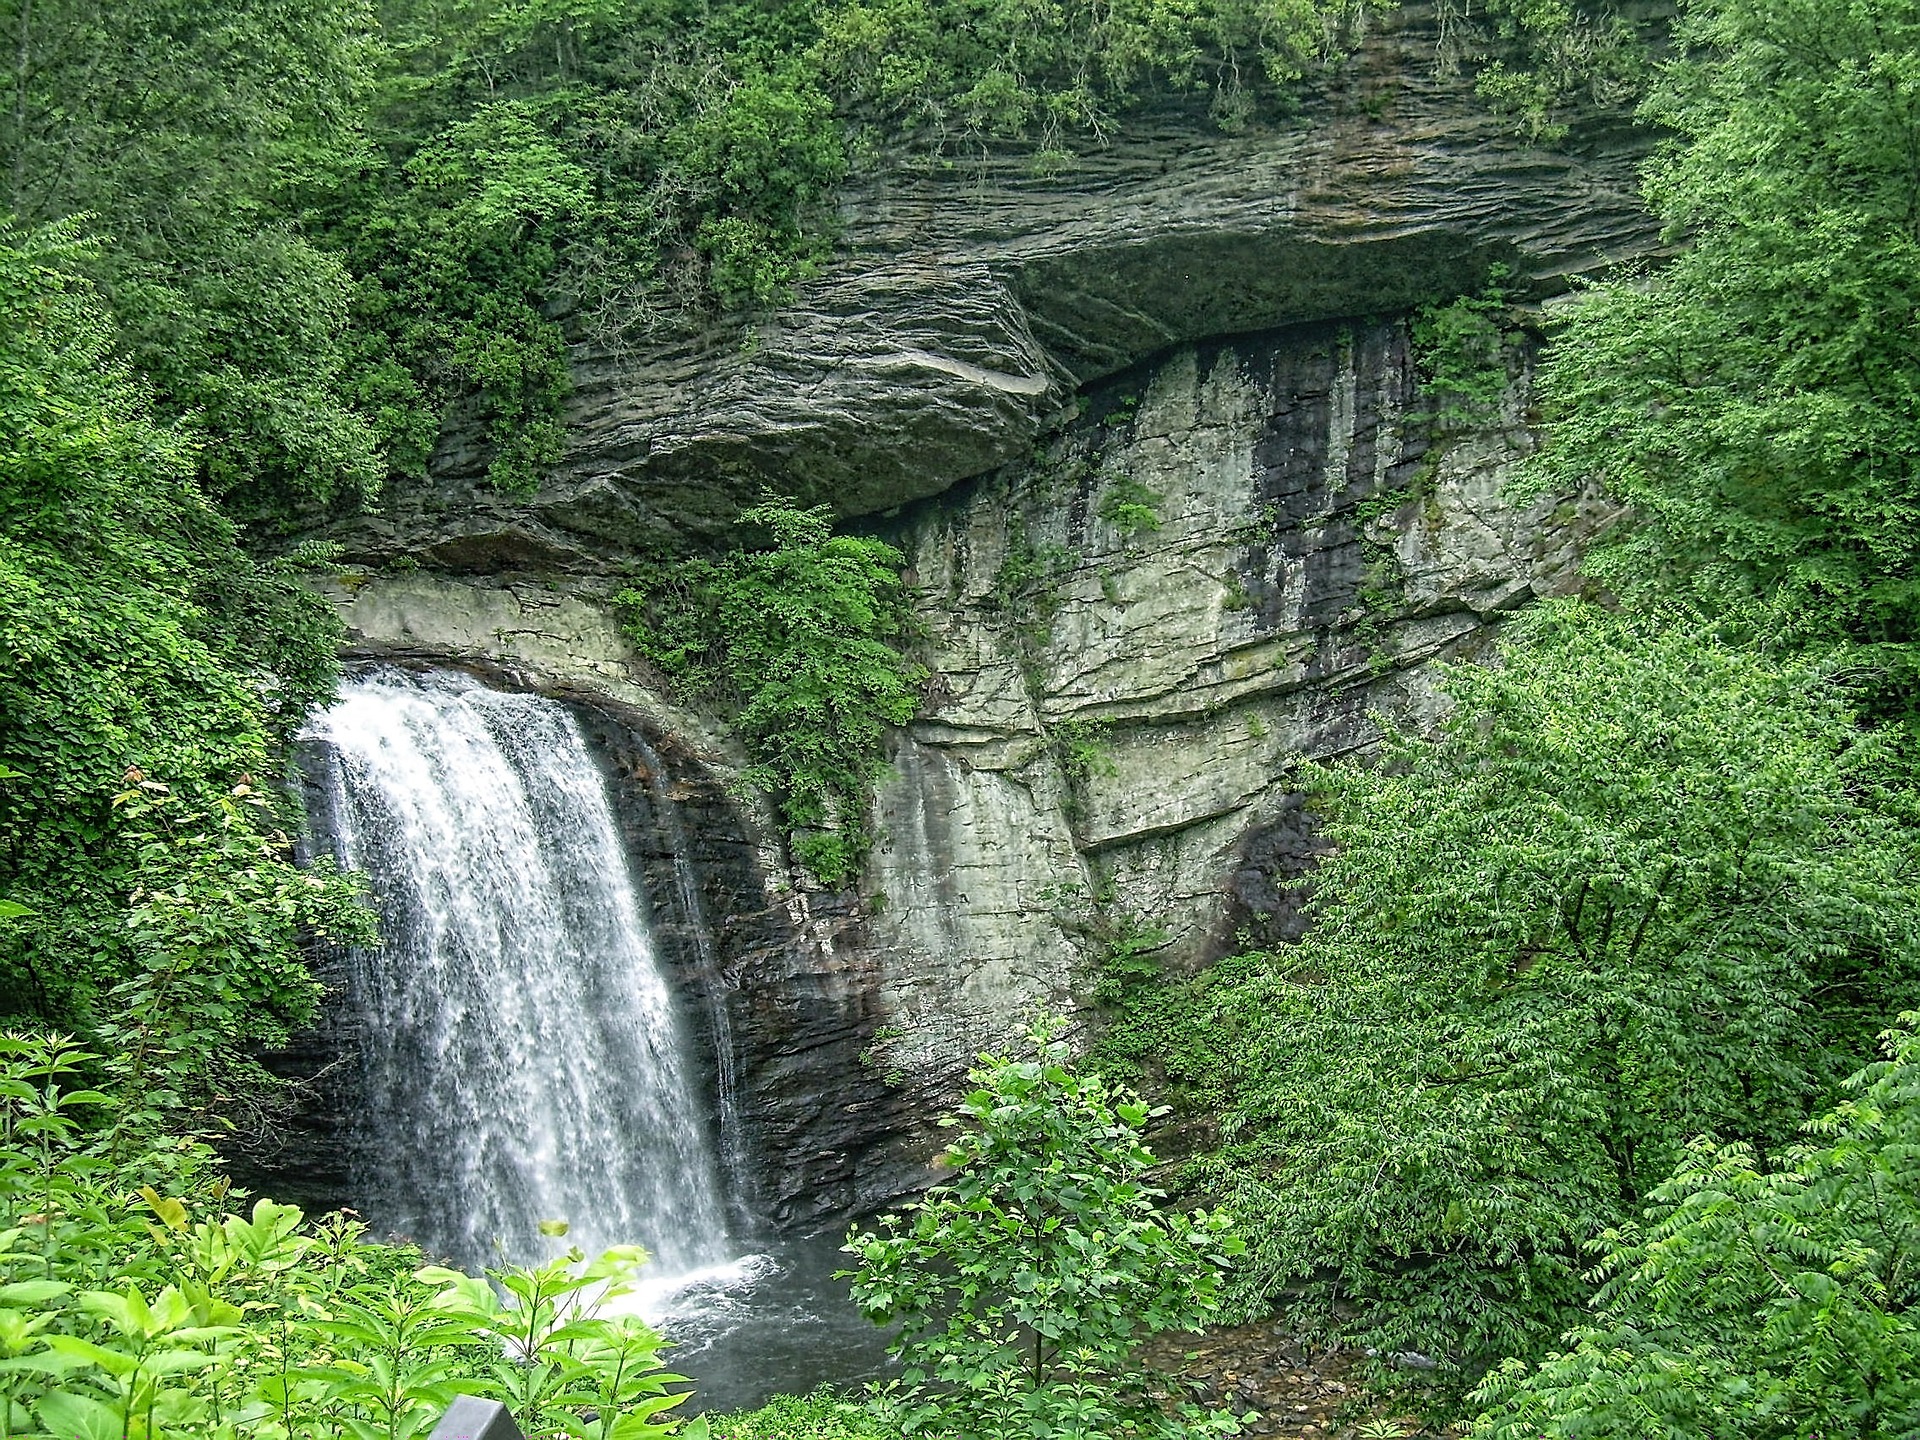 A waterfall in Pisgah National Forest, NC is shown.